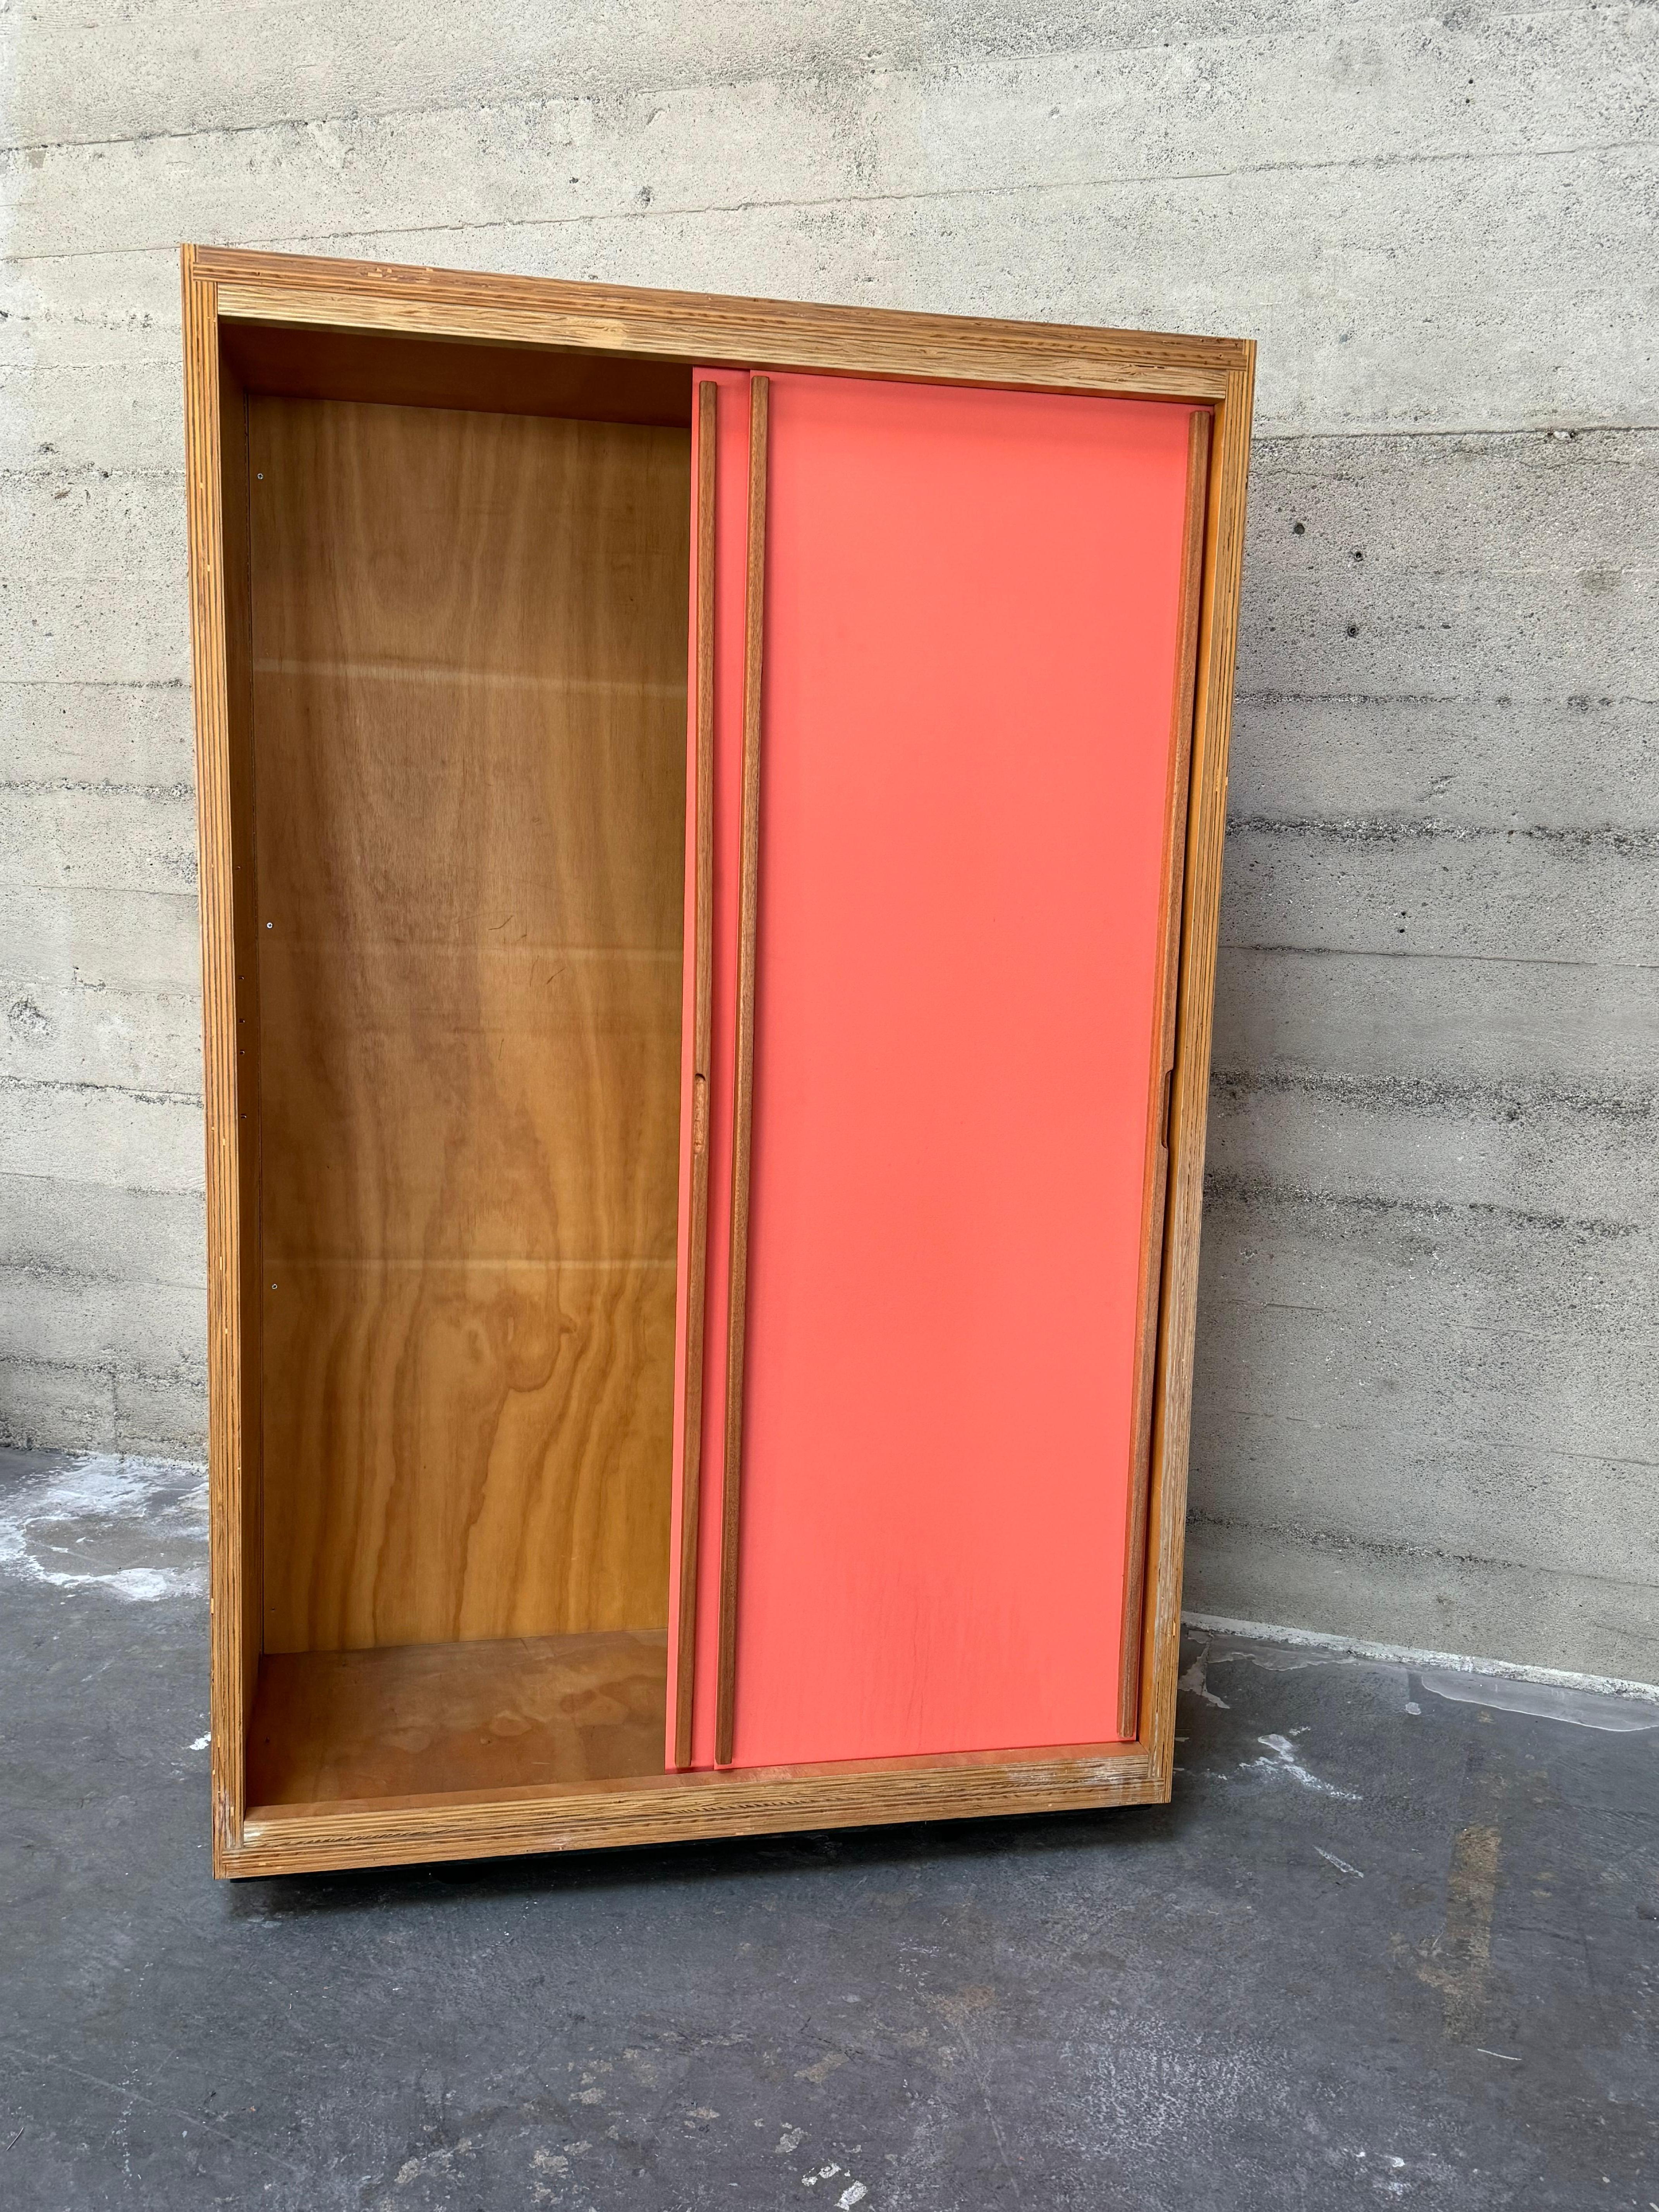 Mid-Century Modern Jean Prouve Style Cabinet with Sliding Doors #2 For Sale